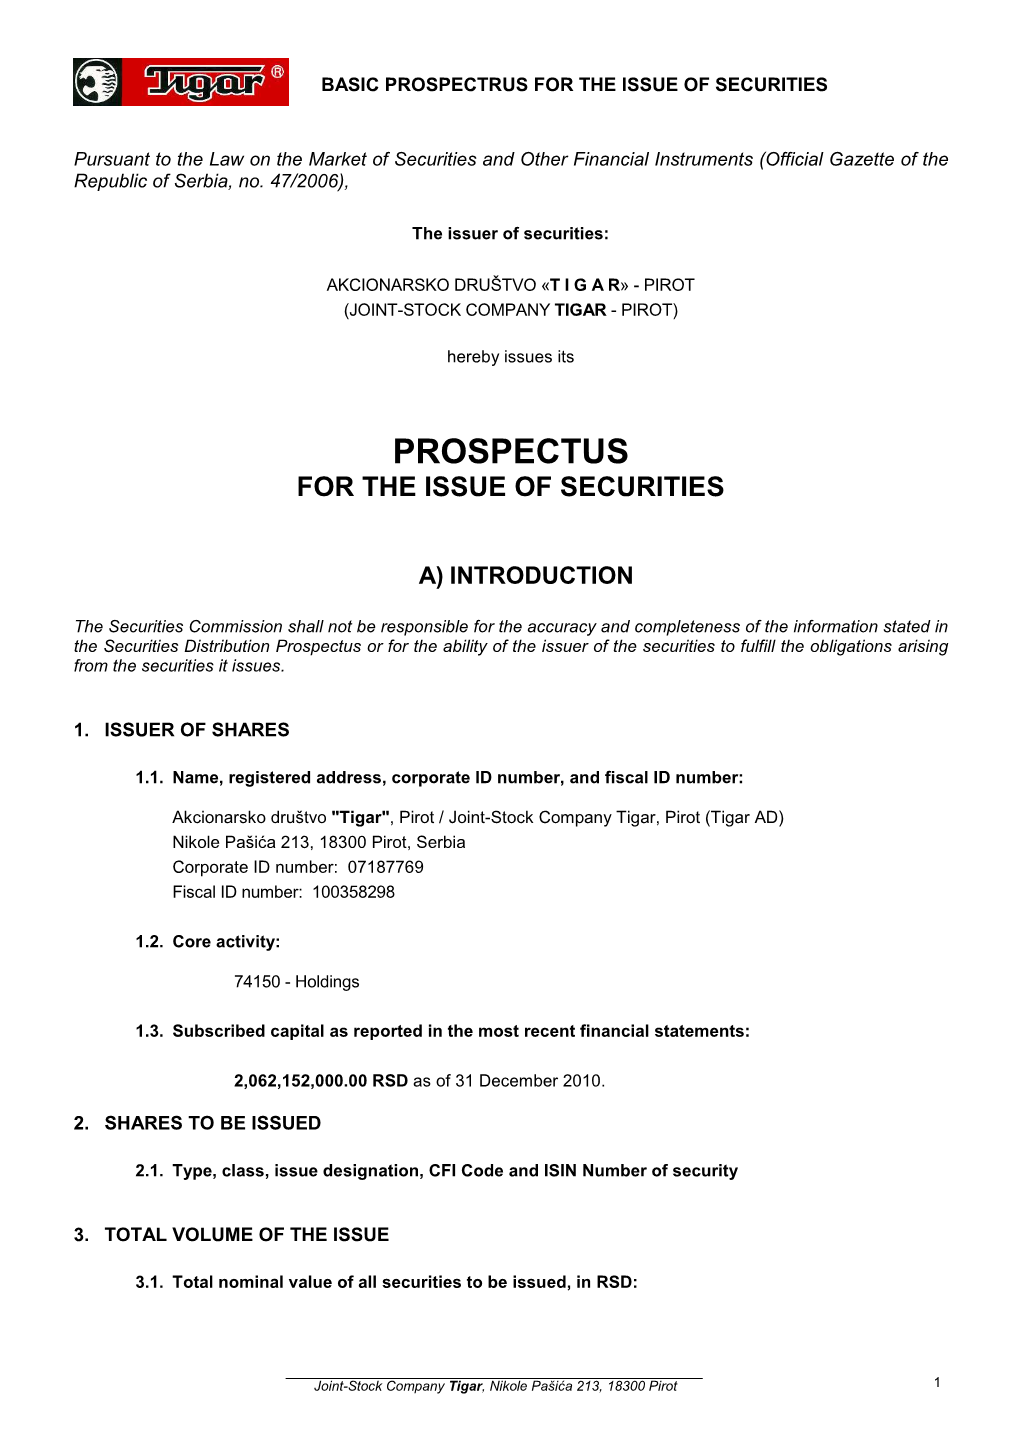 Prospectus for the Issue of Securities